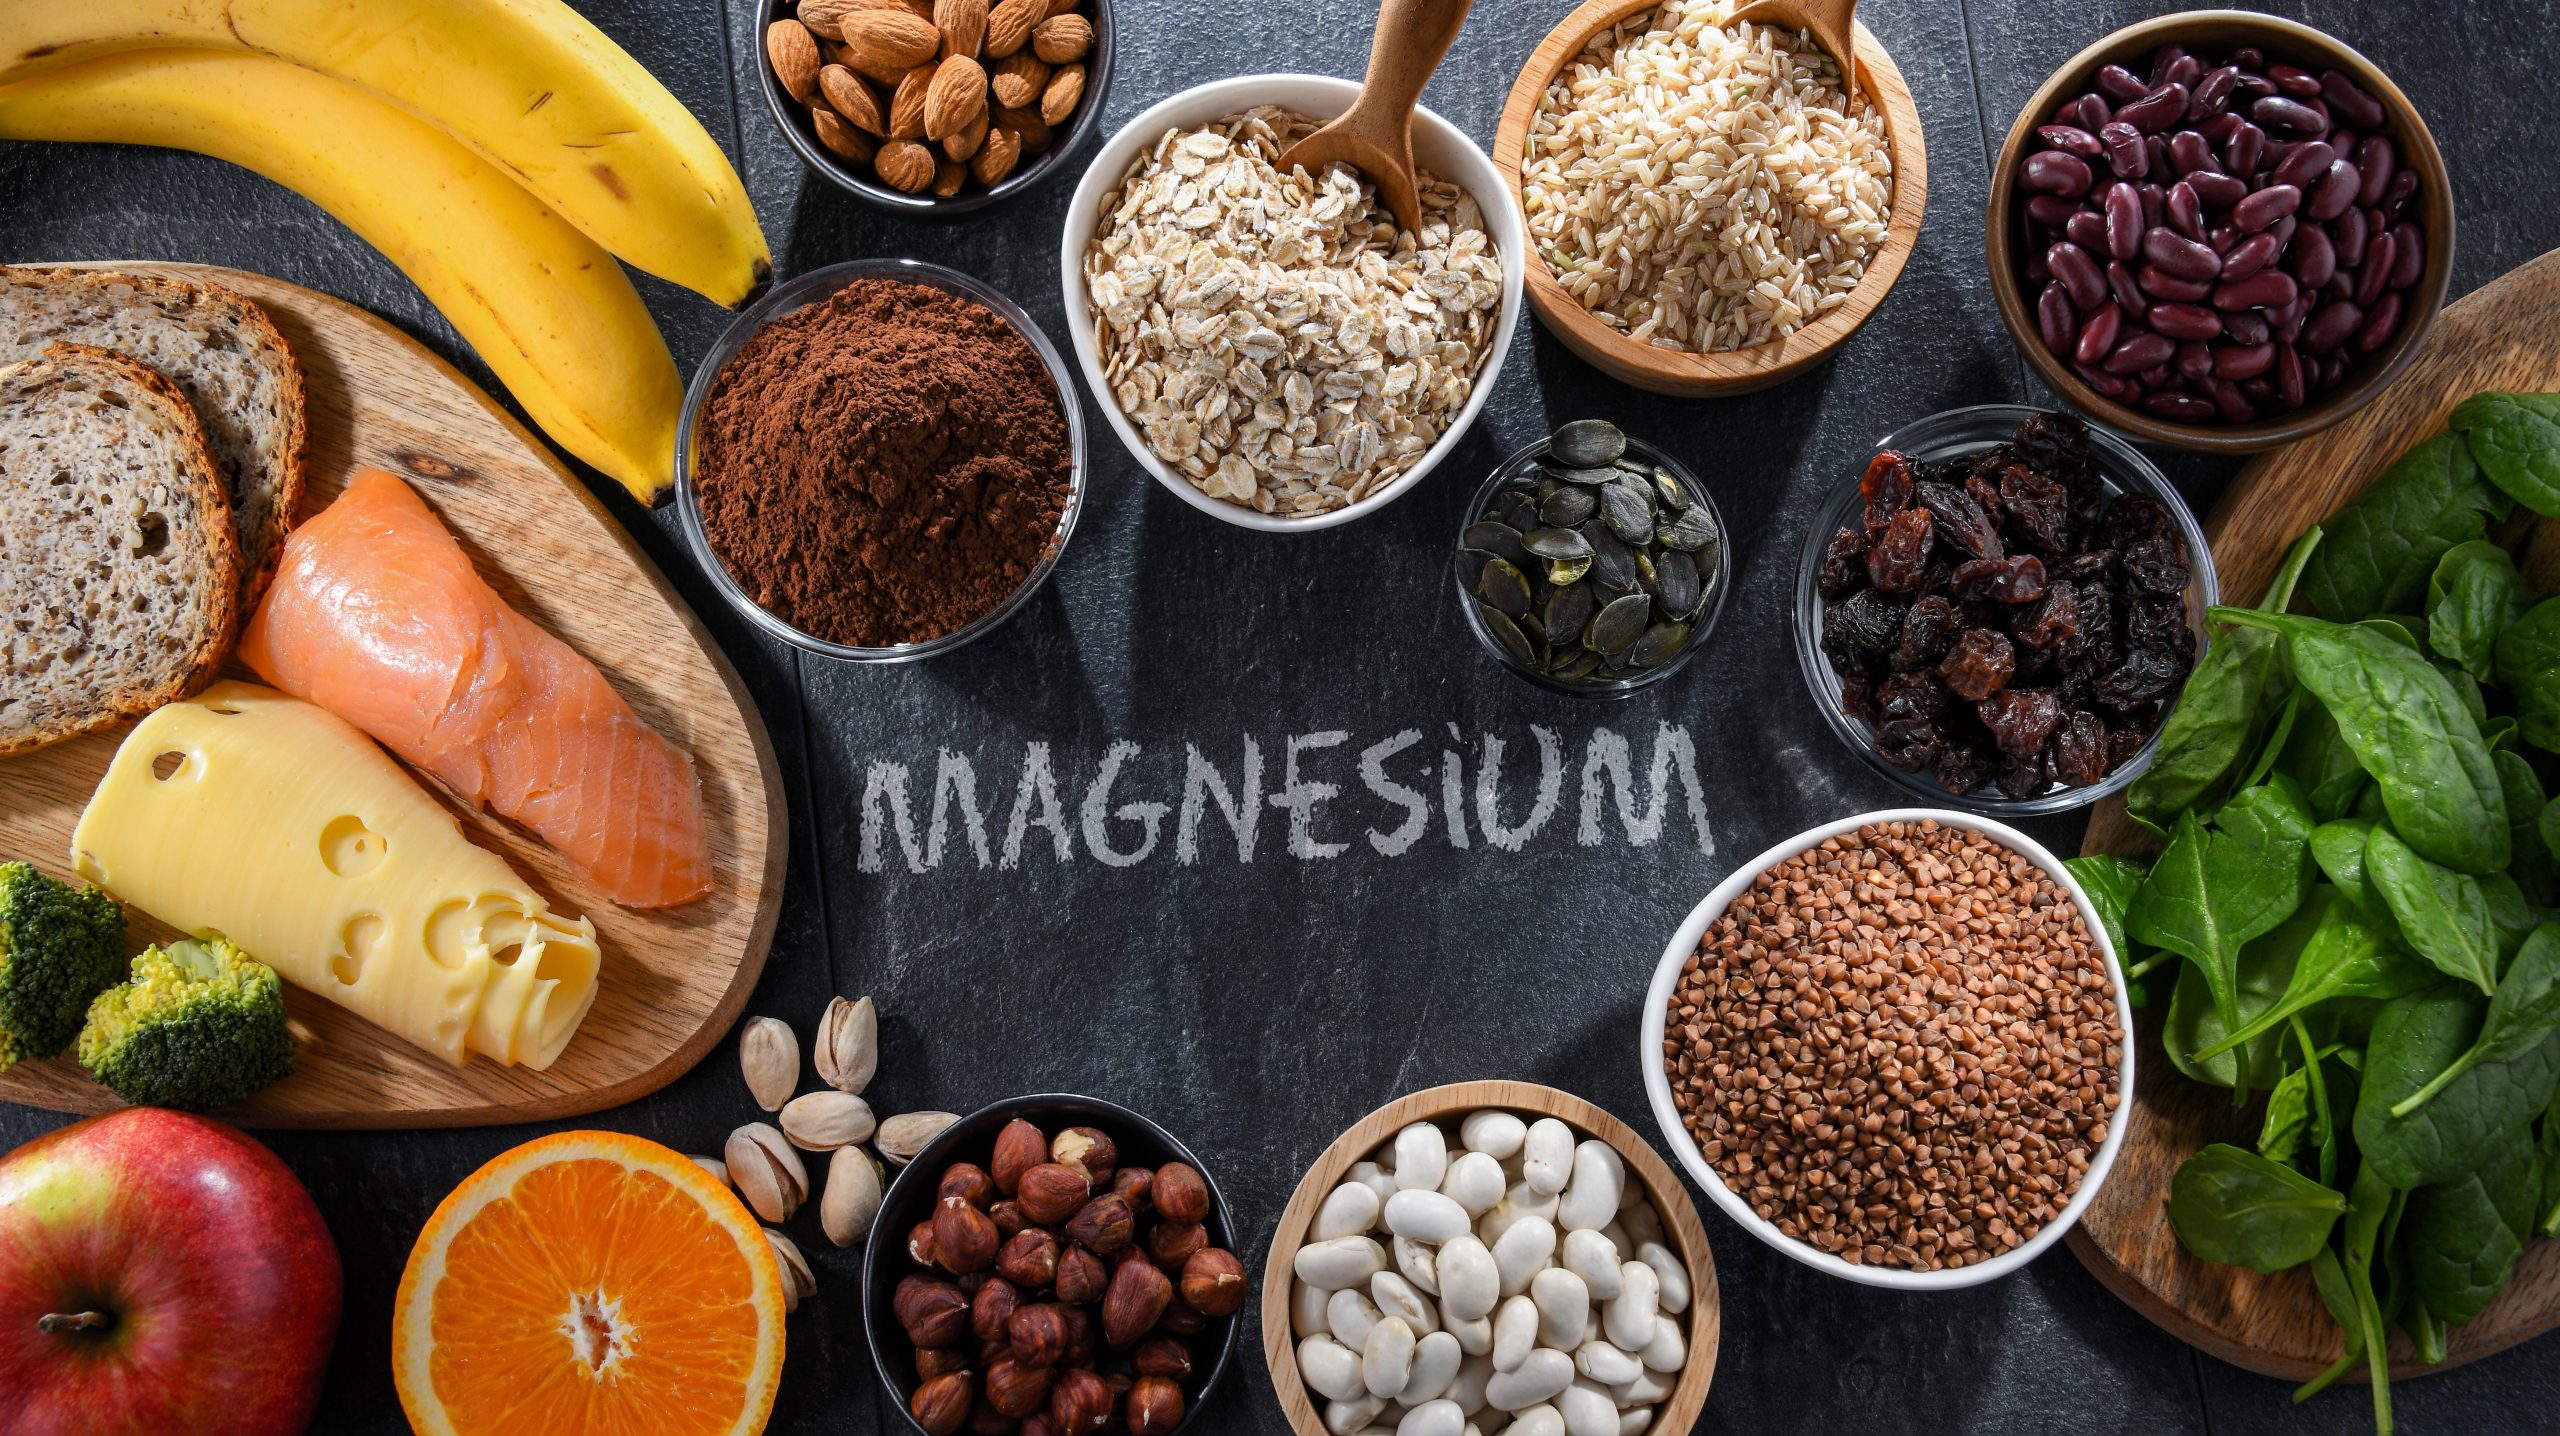 magnesium from food or supplements having health benefits